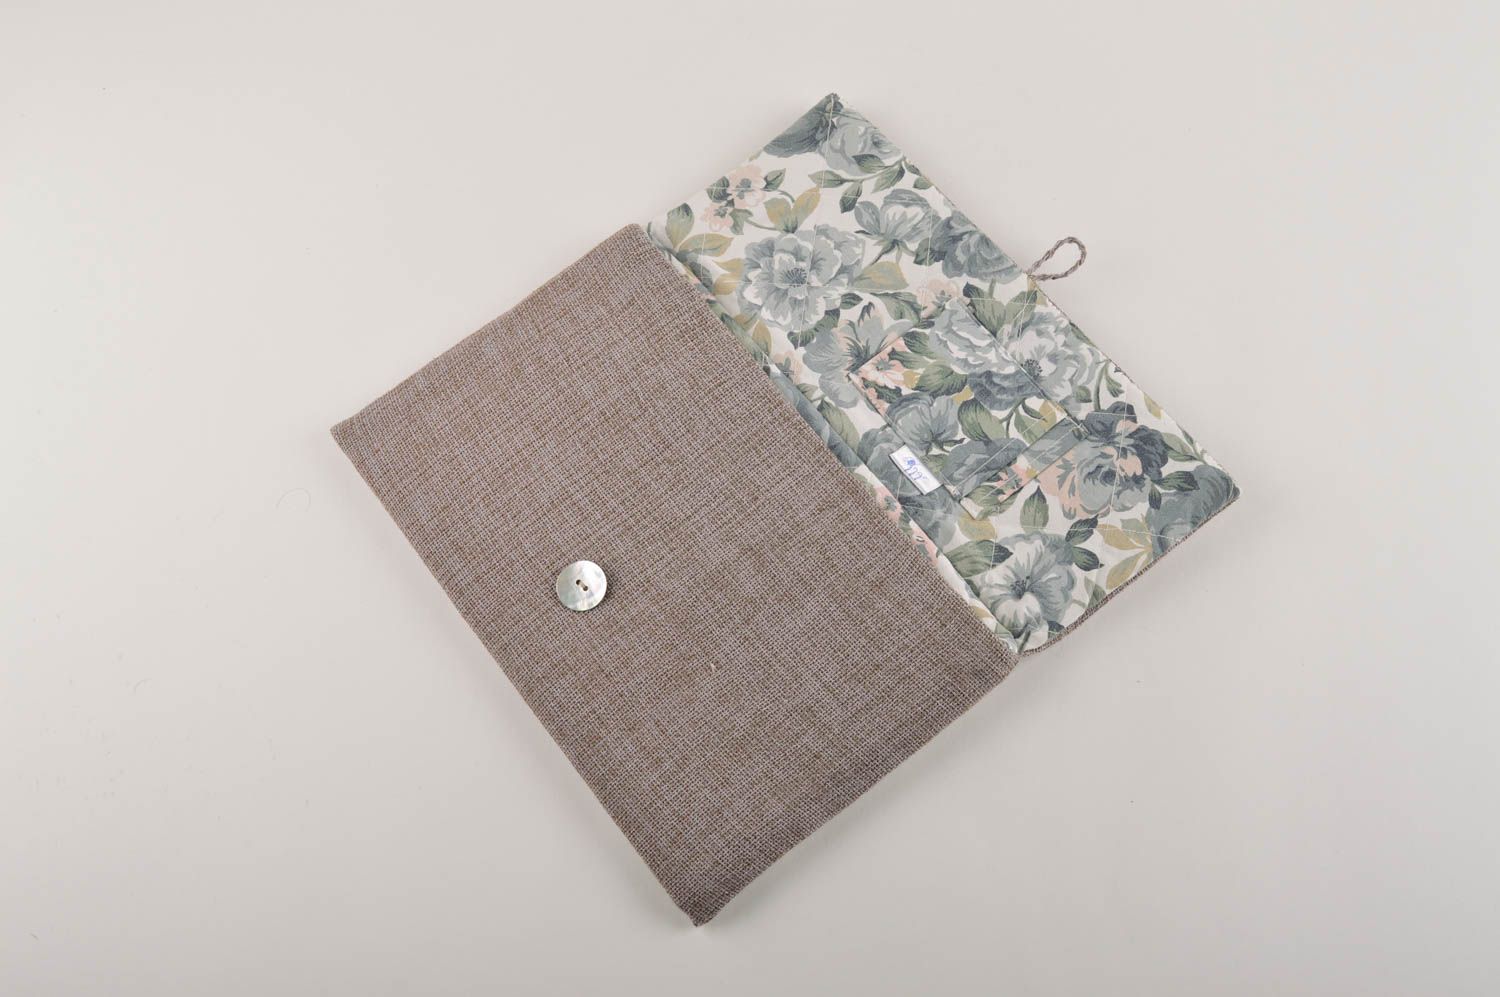 Small handmade beautiful unusual lovely accessories grey designer clutch photo 4